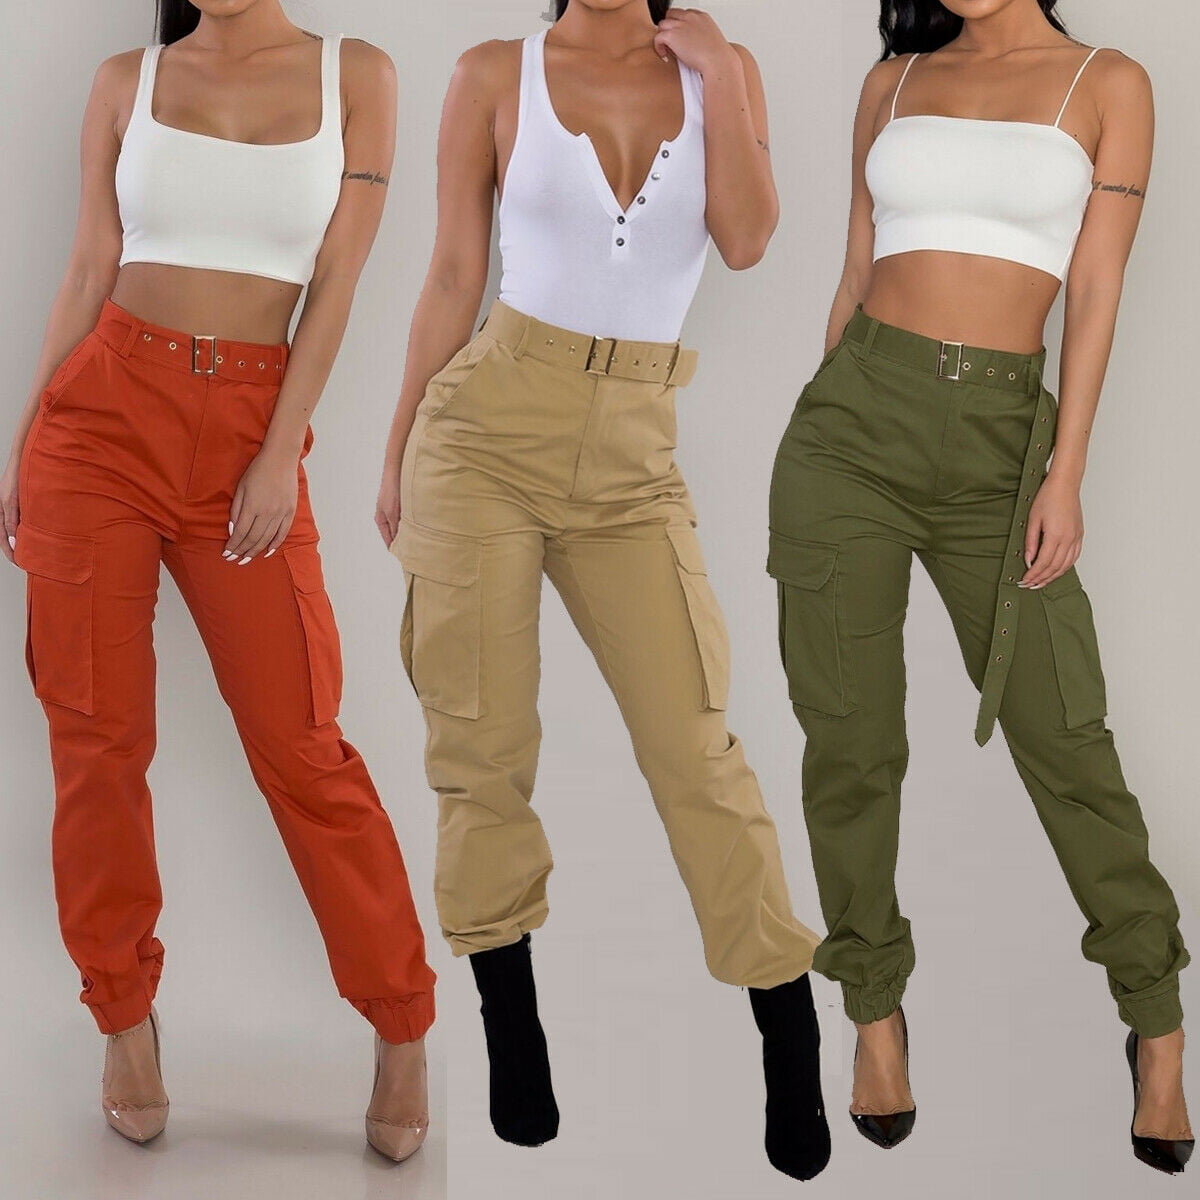 Army Cargo Pants Women - Army Military